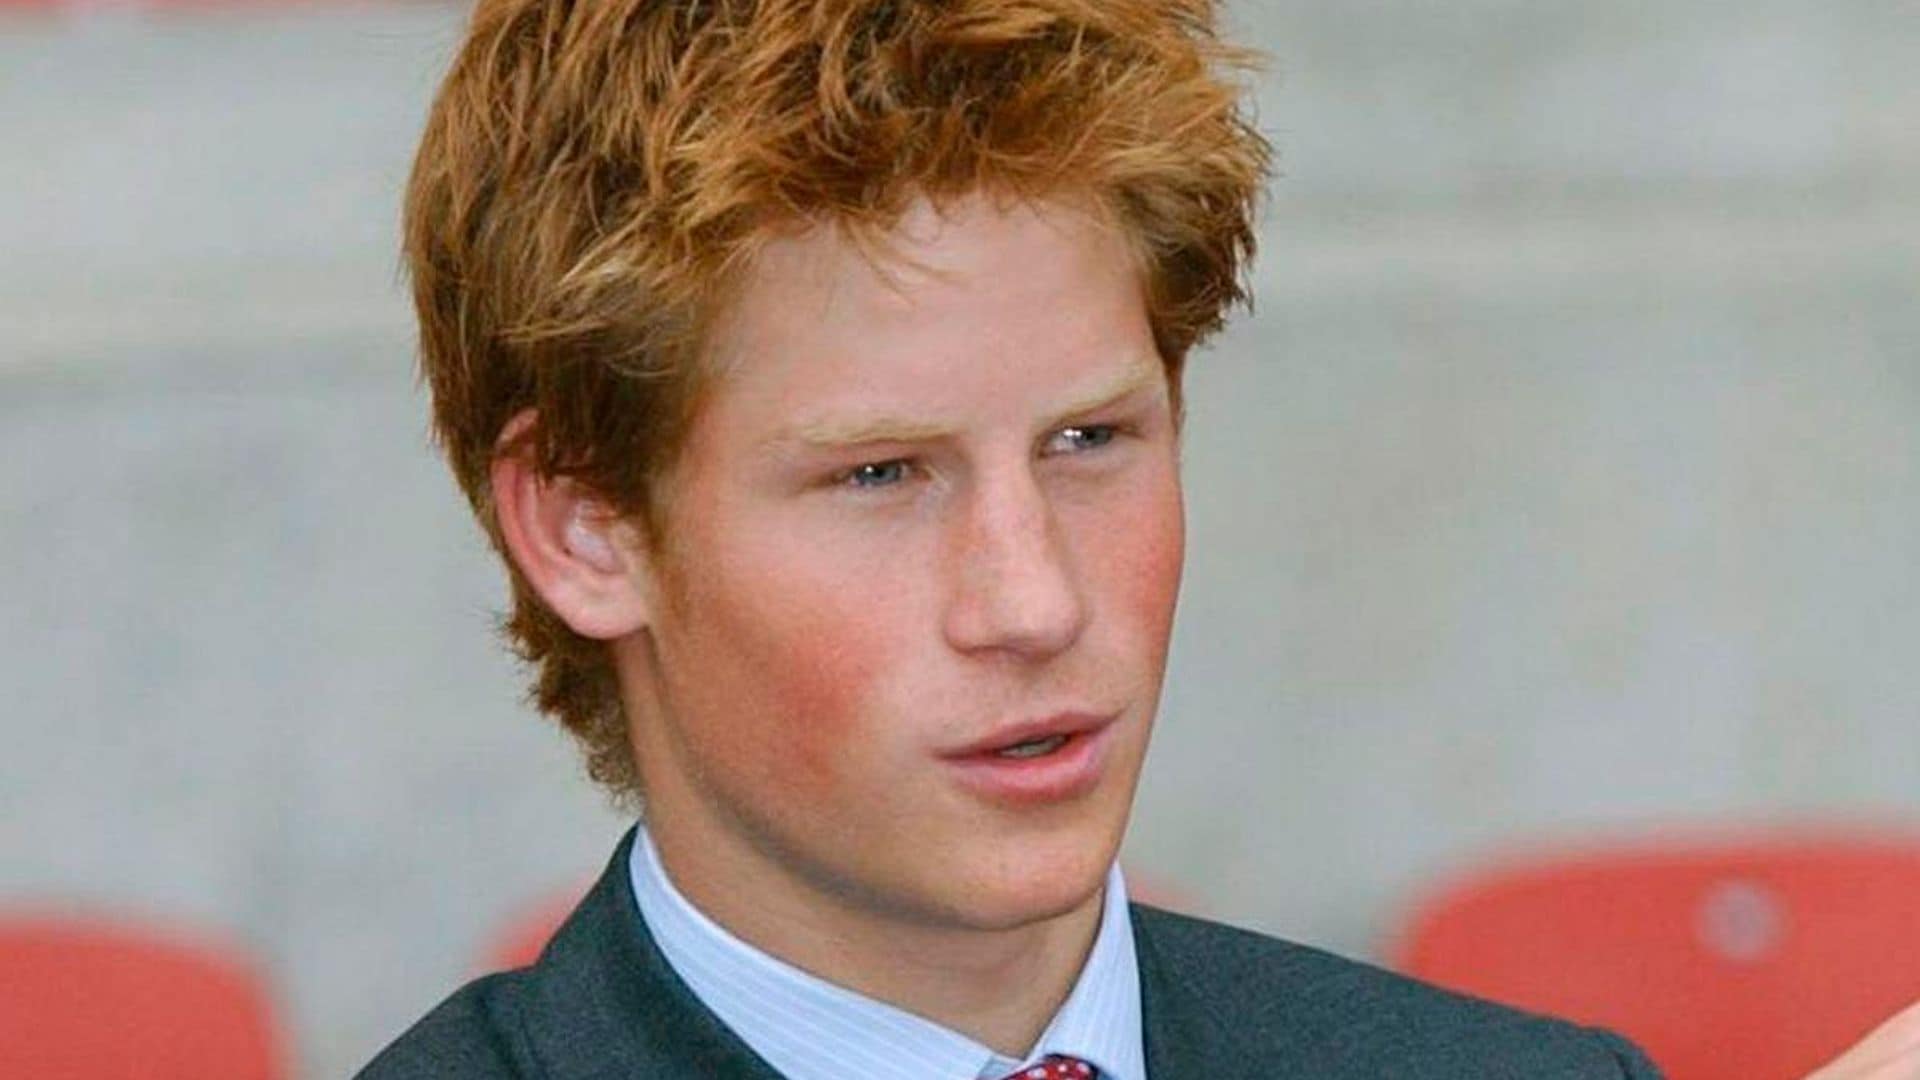 Young Prince Harry: ‘The Crown’ makes open casting call for season 6 of the series